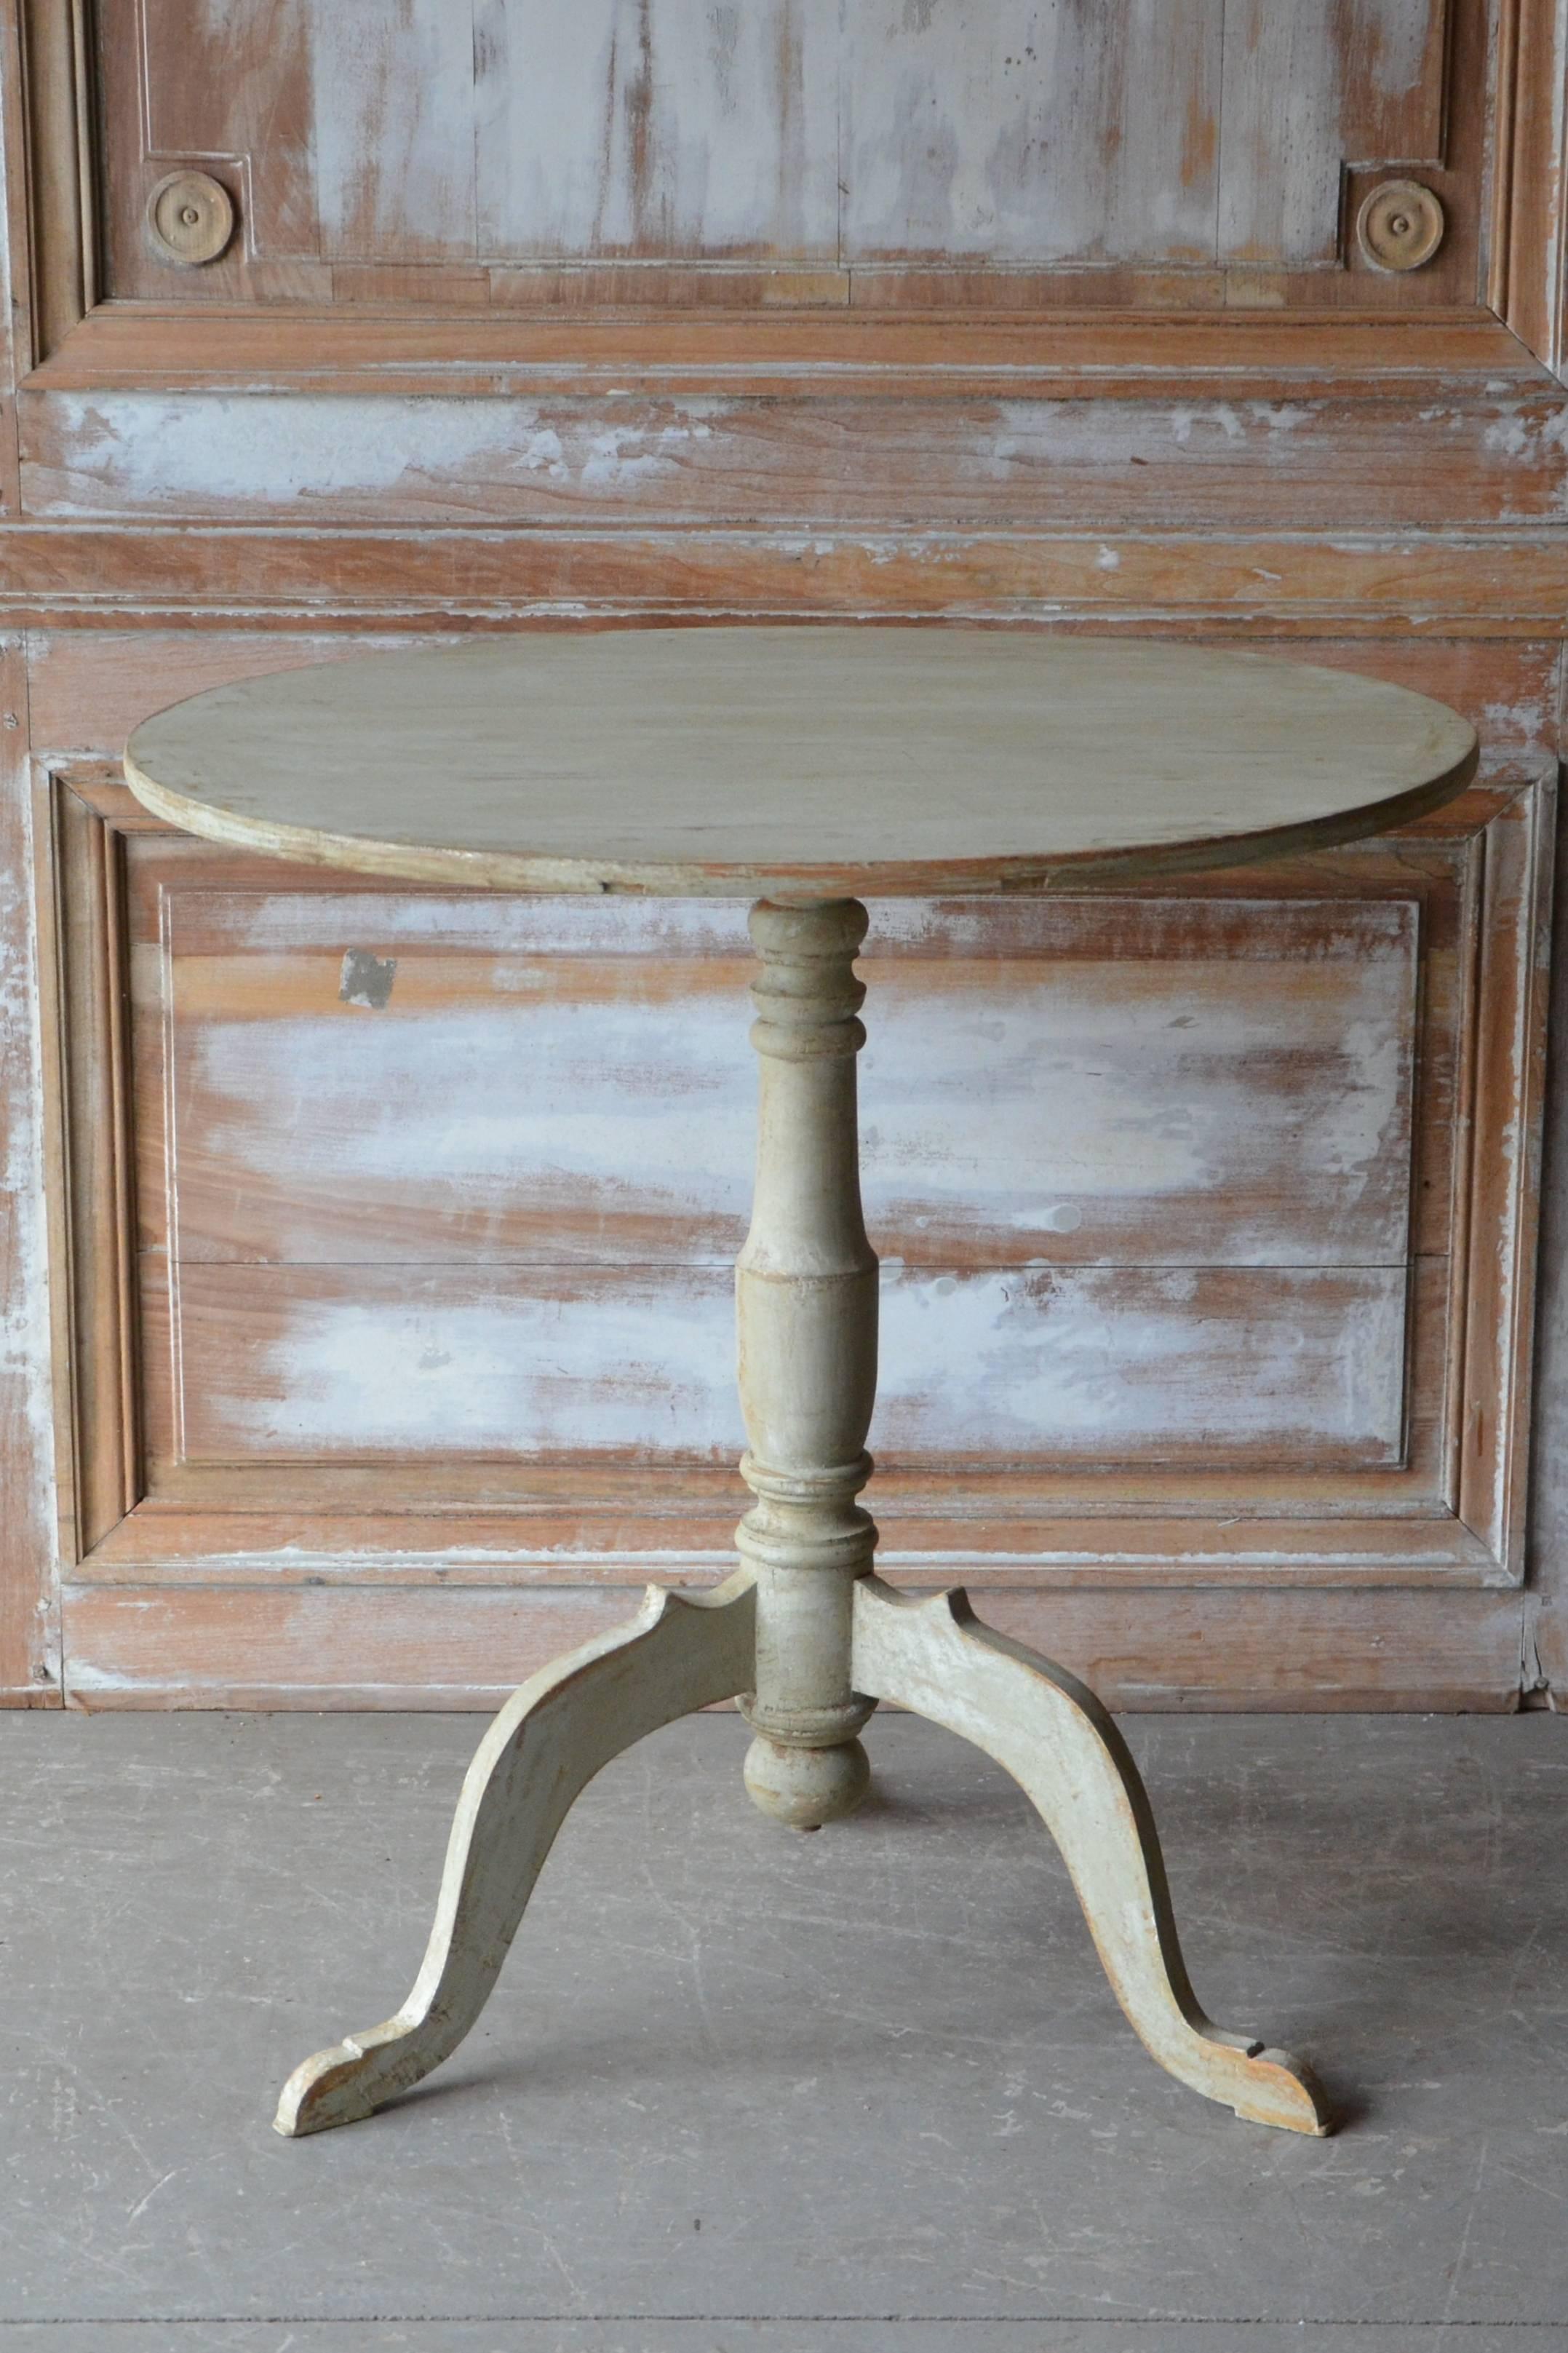 A round tilt top pedestal table with turned base supported by beautifully carved legs. Scrape back to traces of its original color.
Småland, Sweden circa 1830-1840